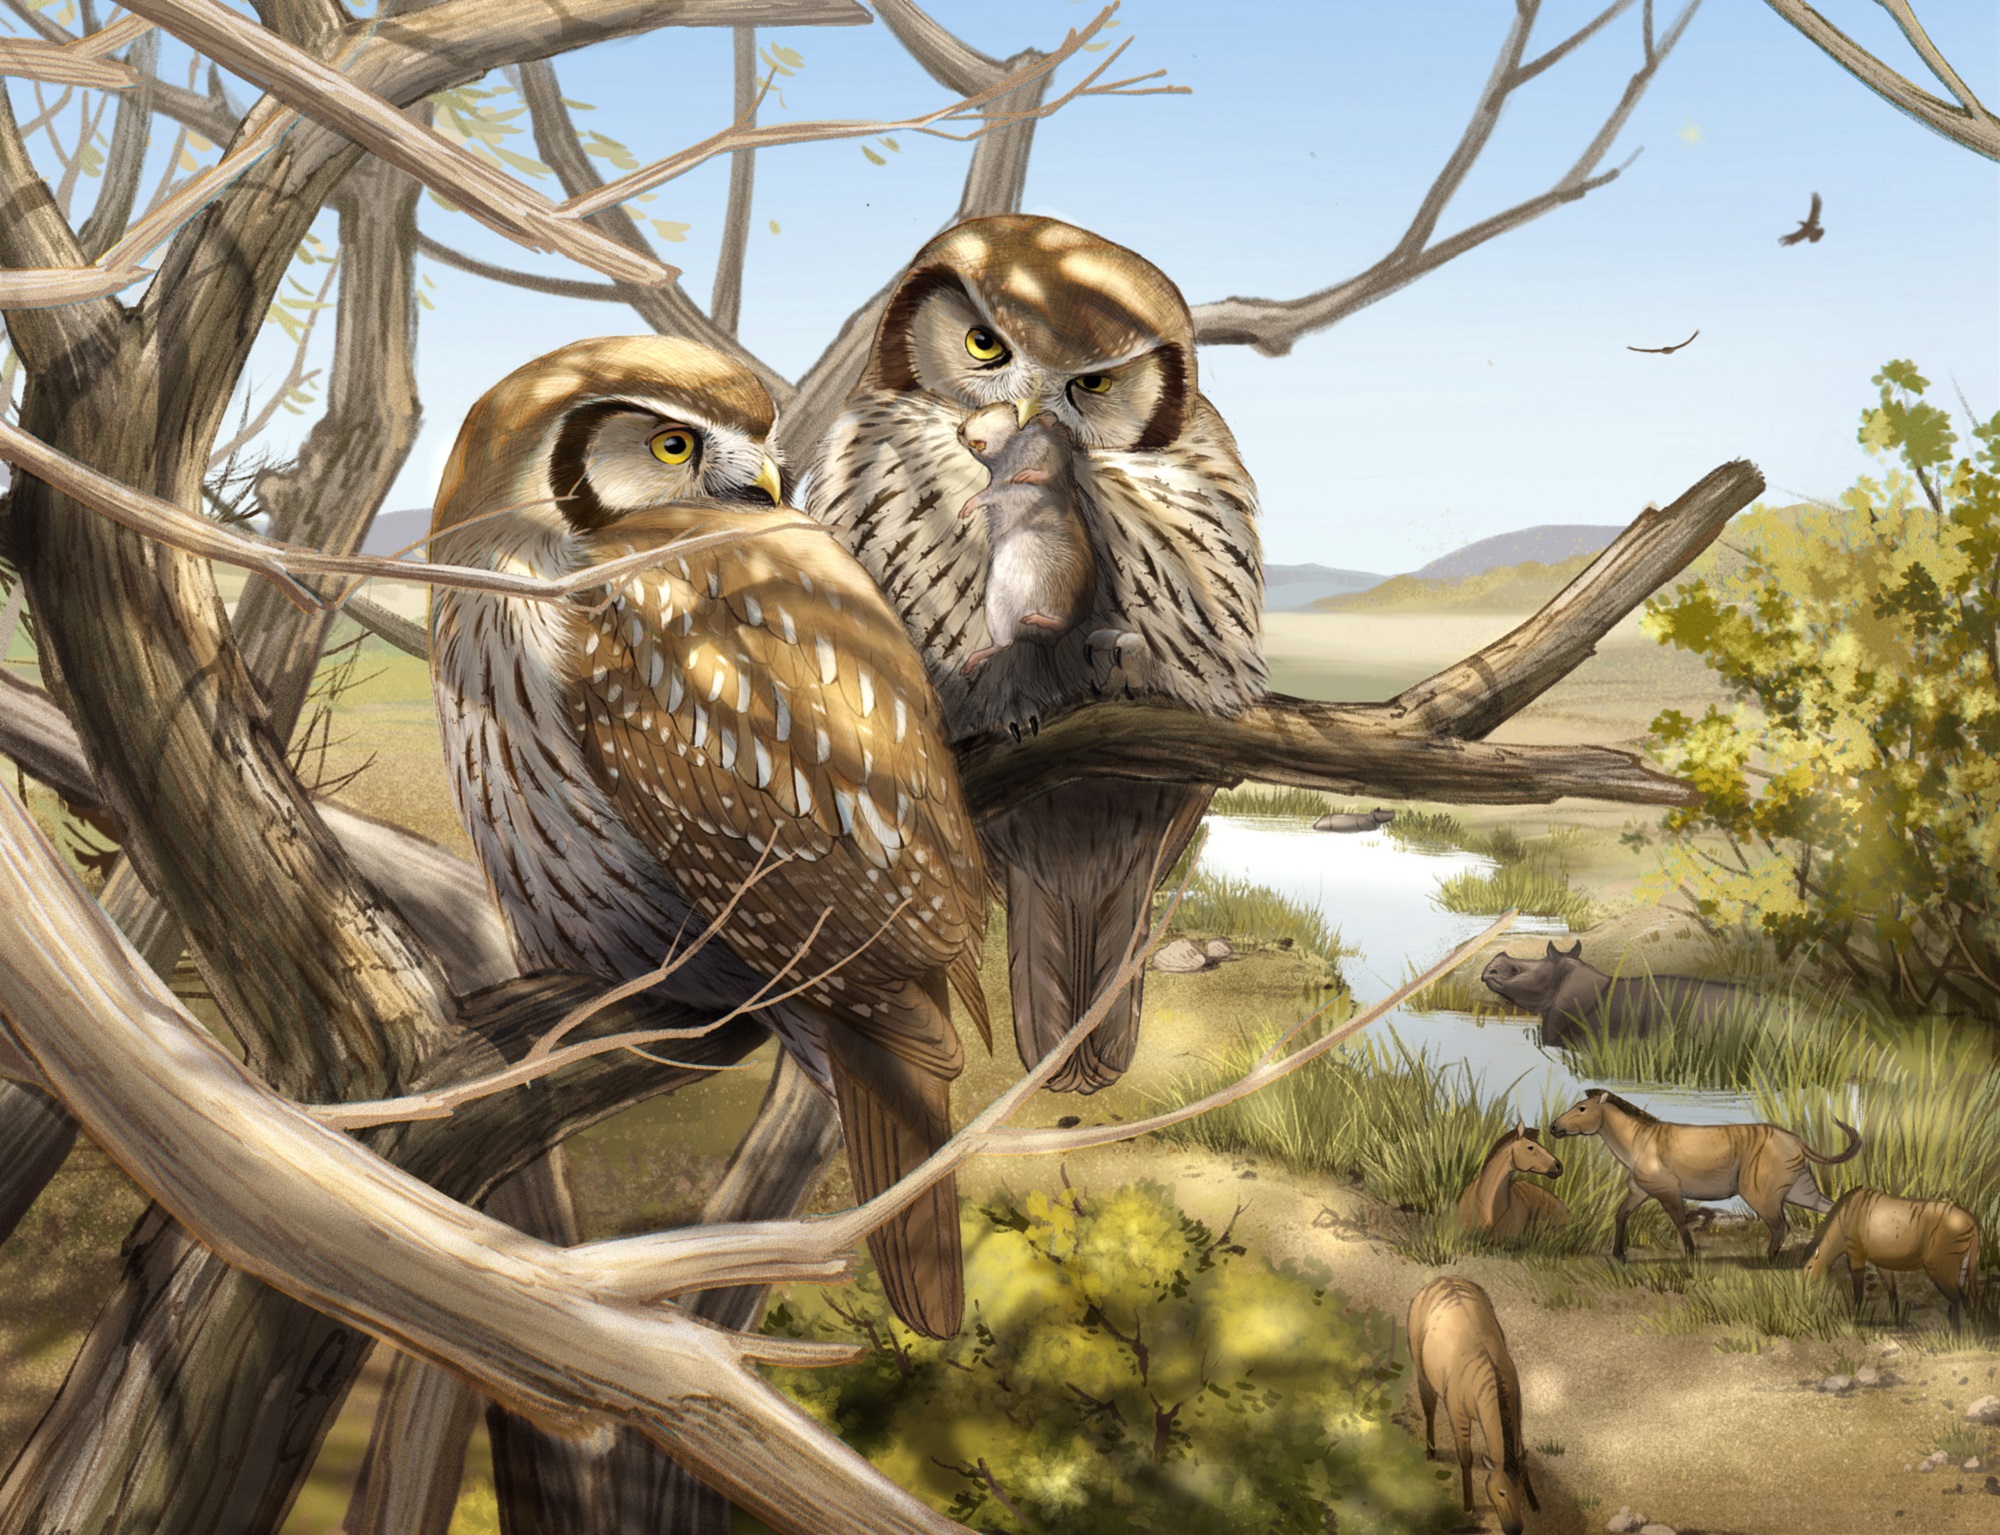 Meet the ancient owl that embraced daylight